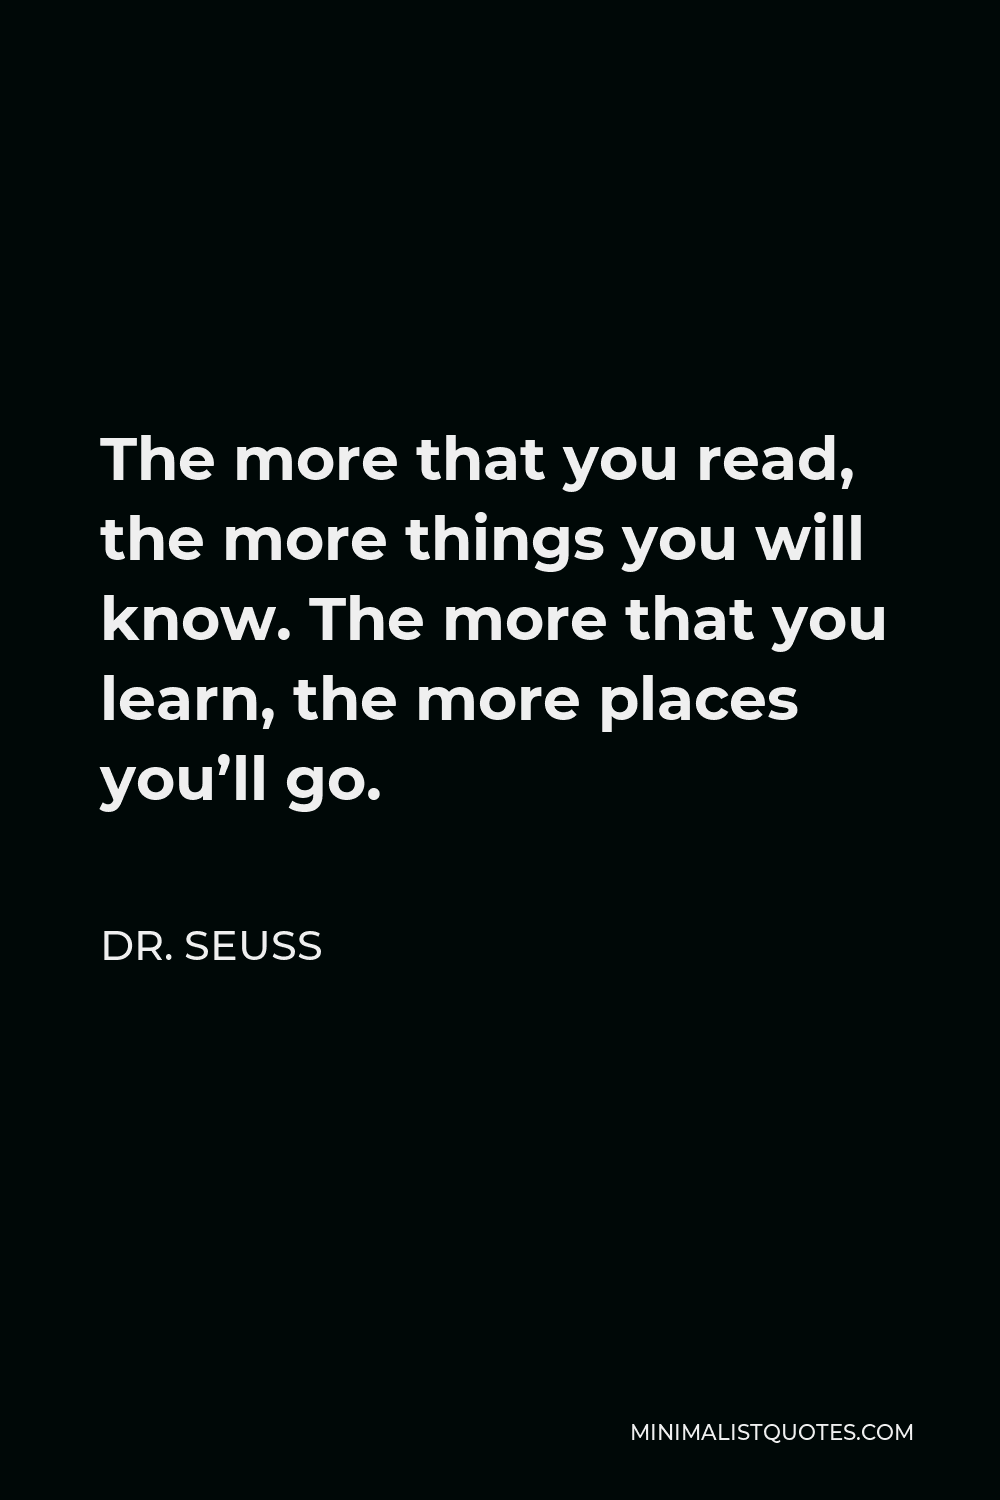 Dr. Seuss Quote: The more that you read, the more things you will know ...